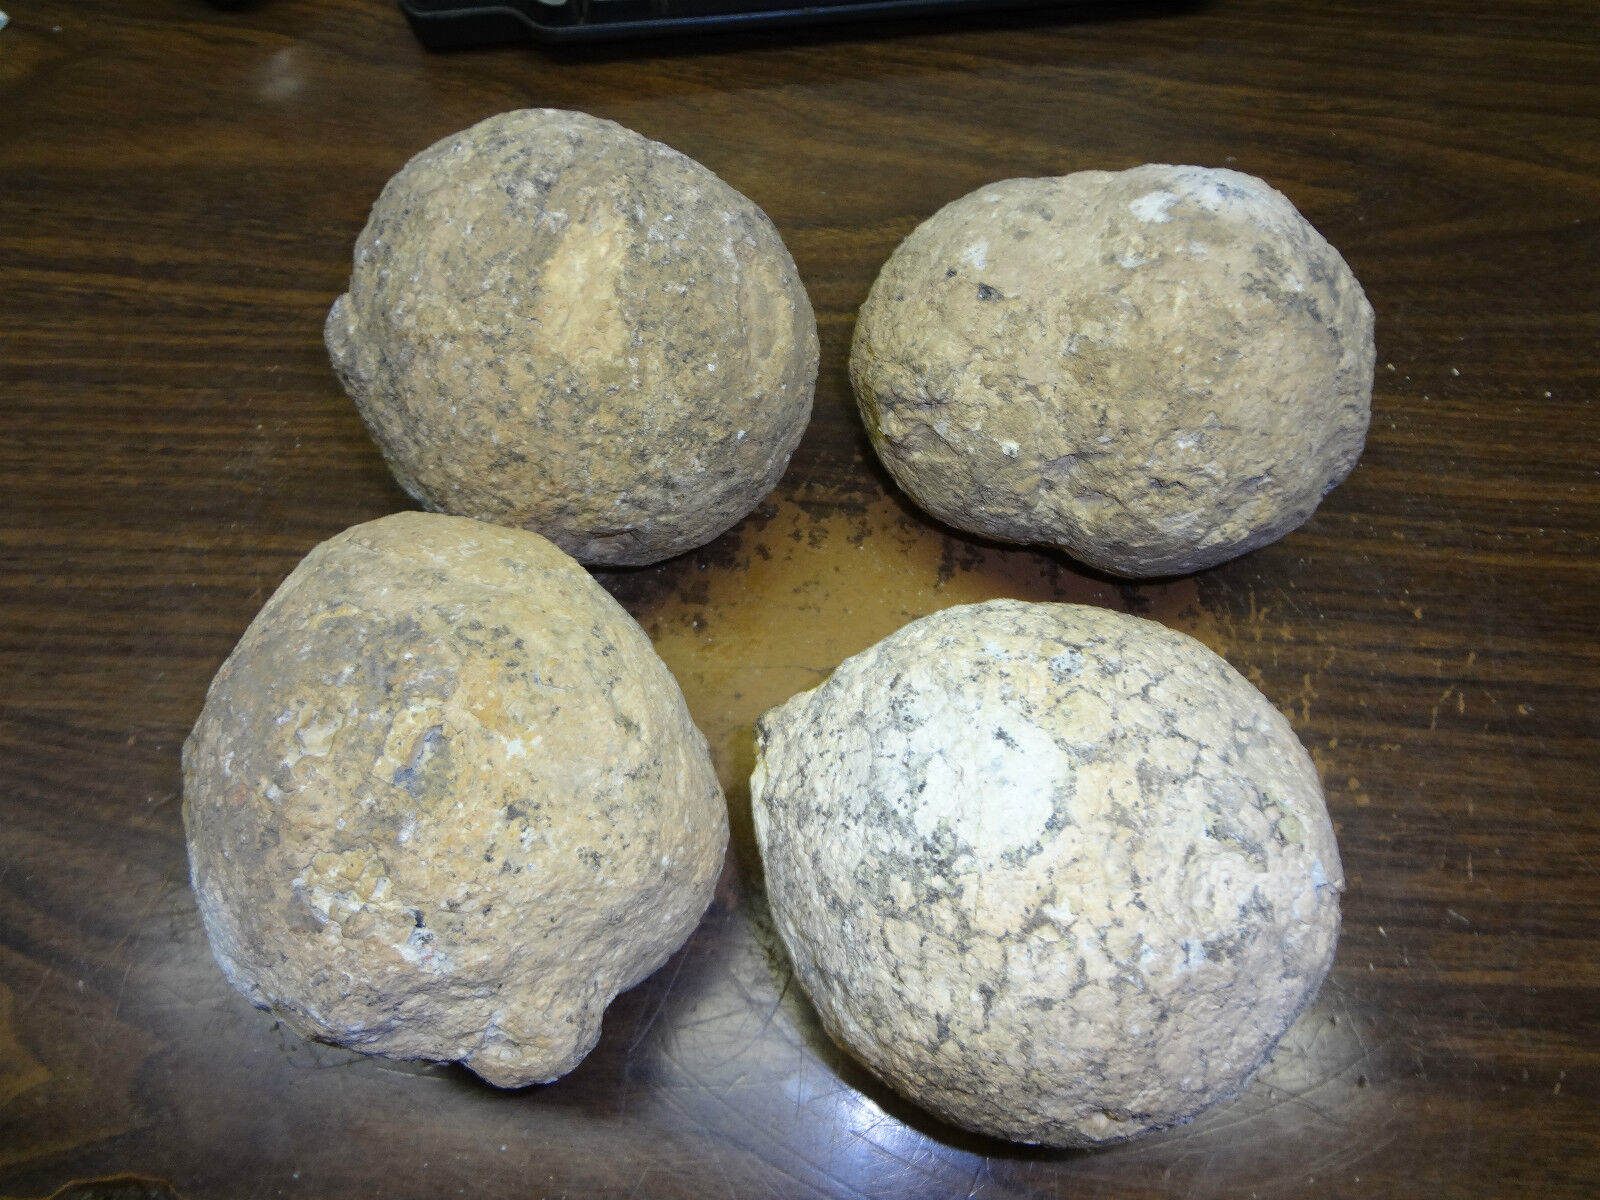 WHOLESALE LOT OF 4 -  4 INCH LAS CHOYAS HOLLOW CRYSTAL GEODES